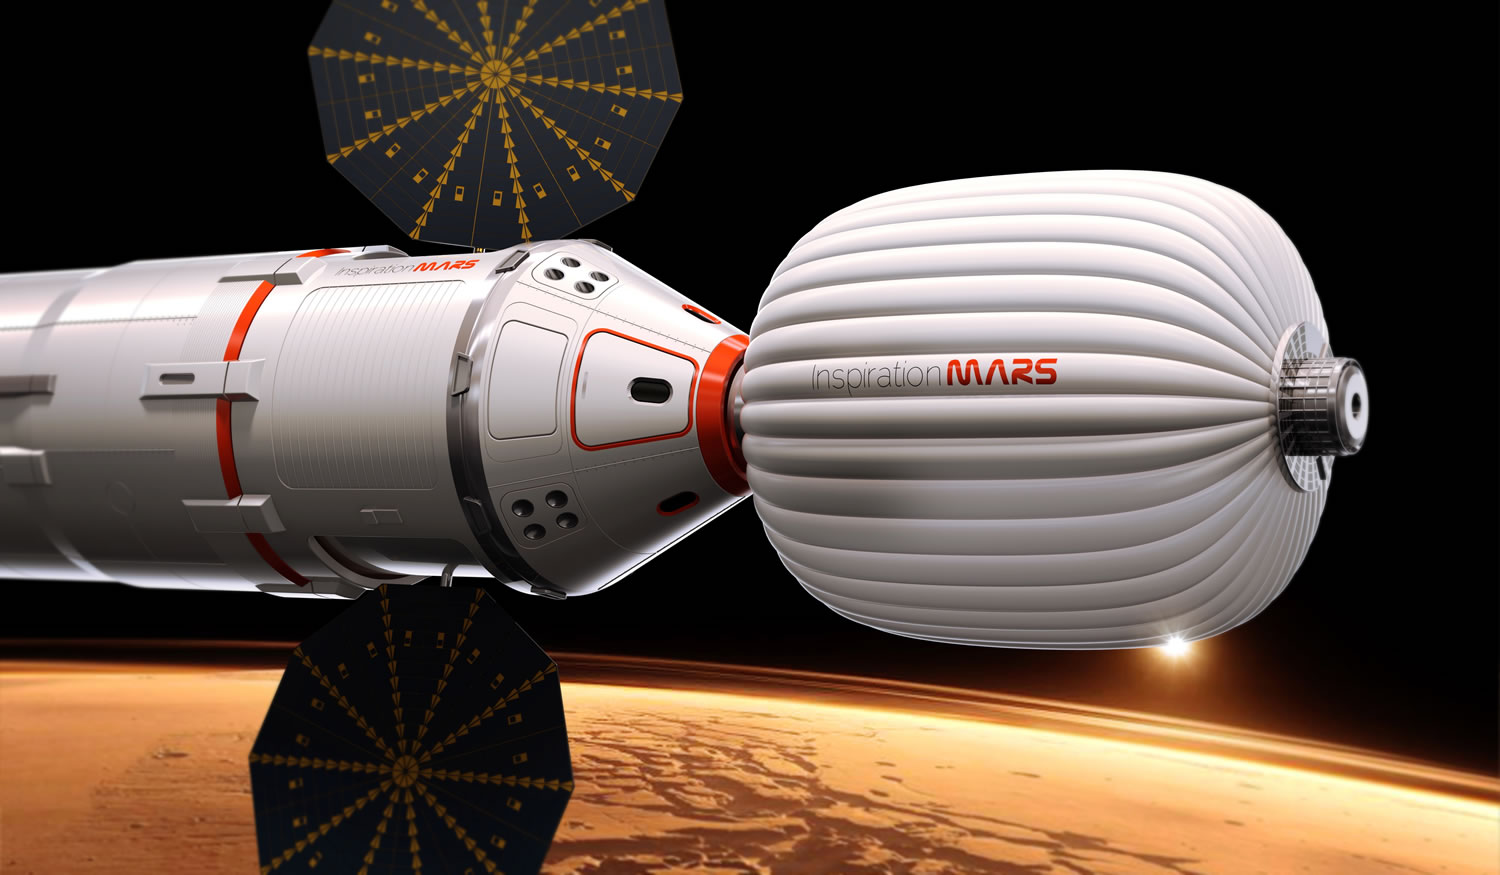 Inspiration Mars
An artist's conceptual drawing of a spacecraft envisioned by Inspiration Mars, which wants to send a married couple to fly past Mars beginning in 2018.